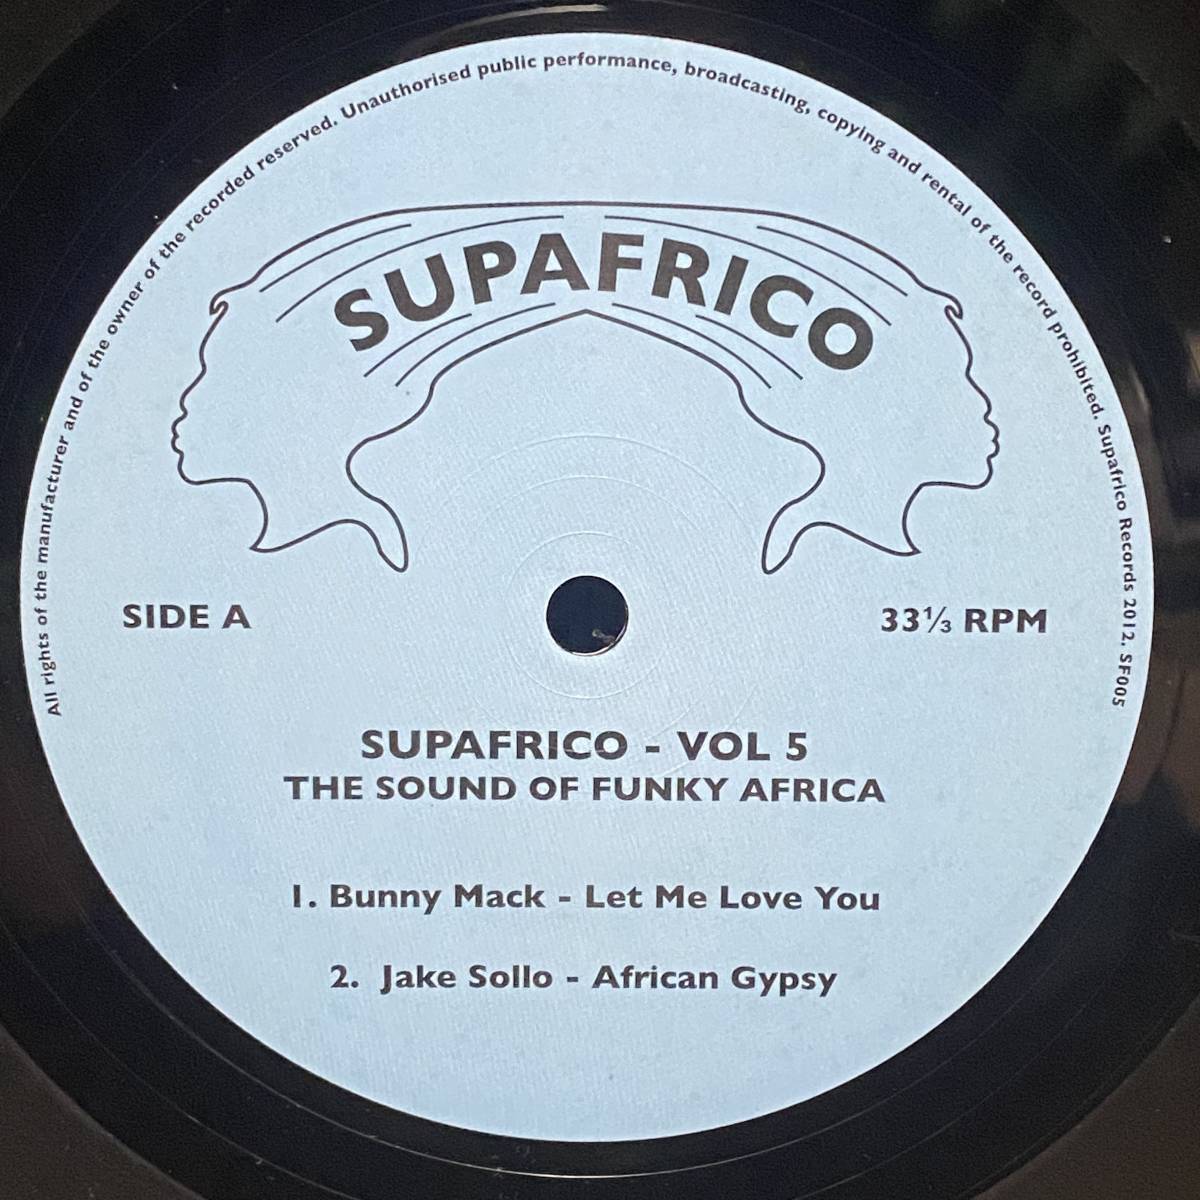 12inch/アフリカンブギーコンピ！SUPAFRICO VOL.5/THE SOUND OF FUNKY AFRICA/BUNNY MACK/LET ME LOVE YOU/JAKE SOLLO/ナイジェリア_画像1